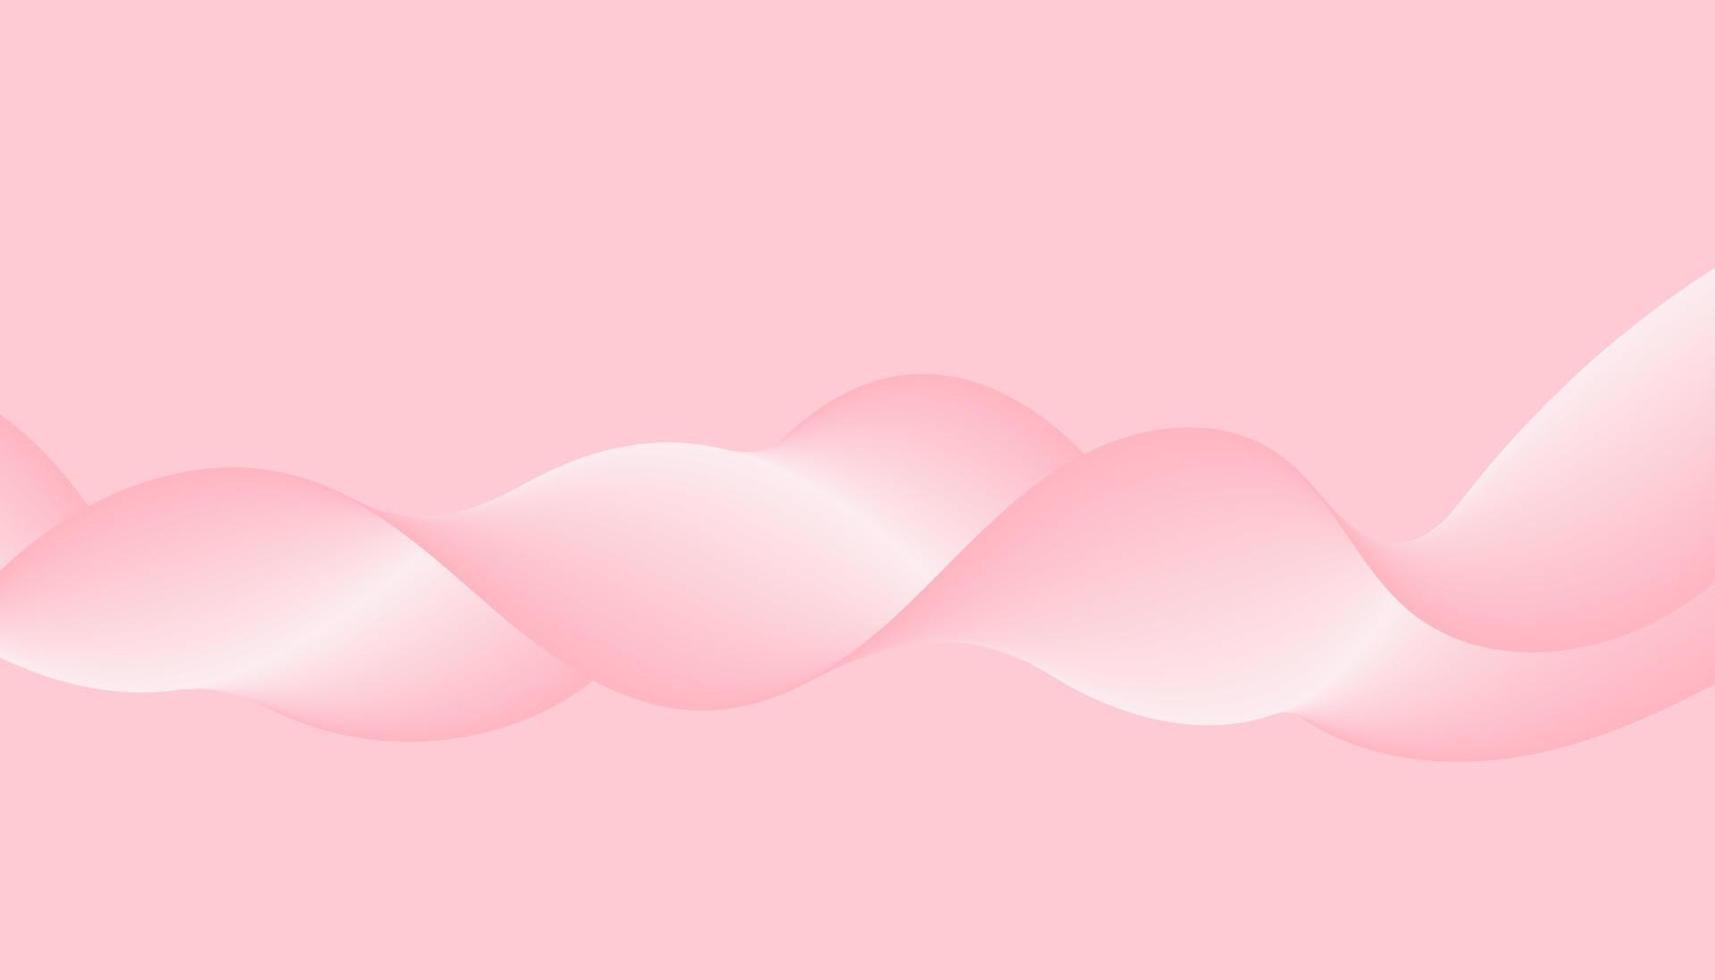 abstract minimal elegant pink wave background vector